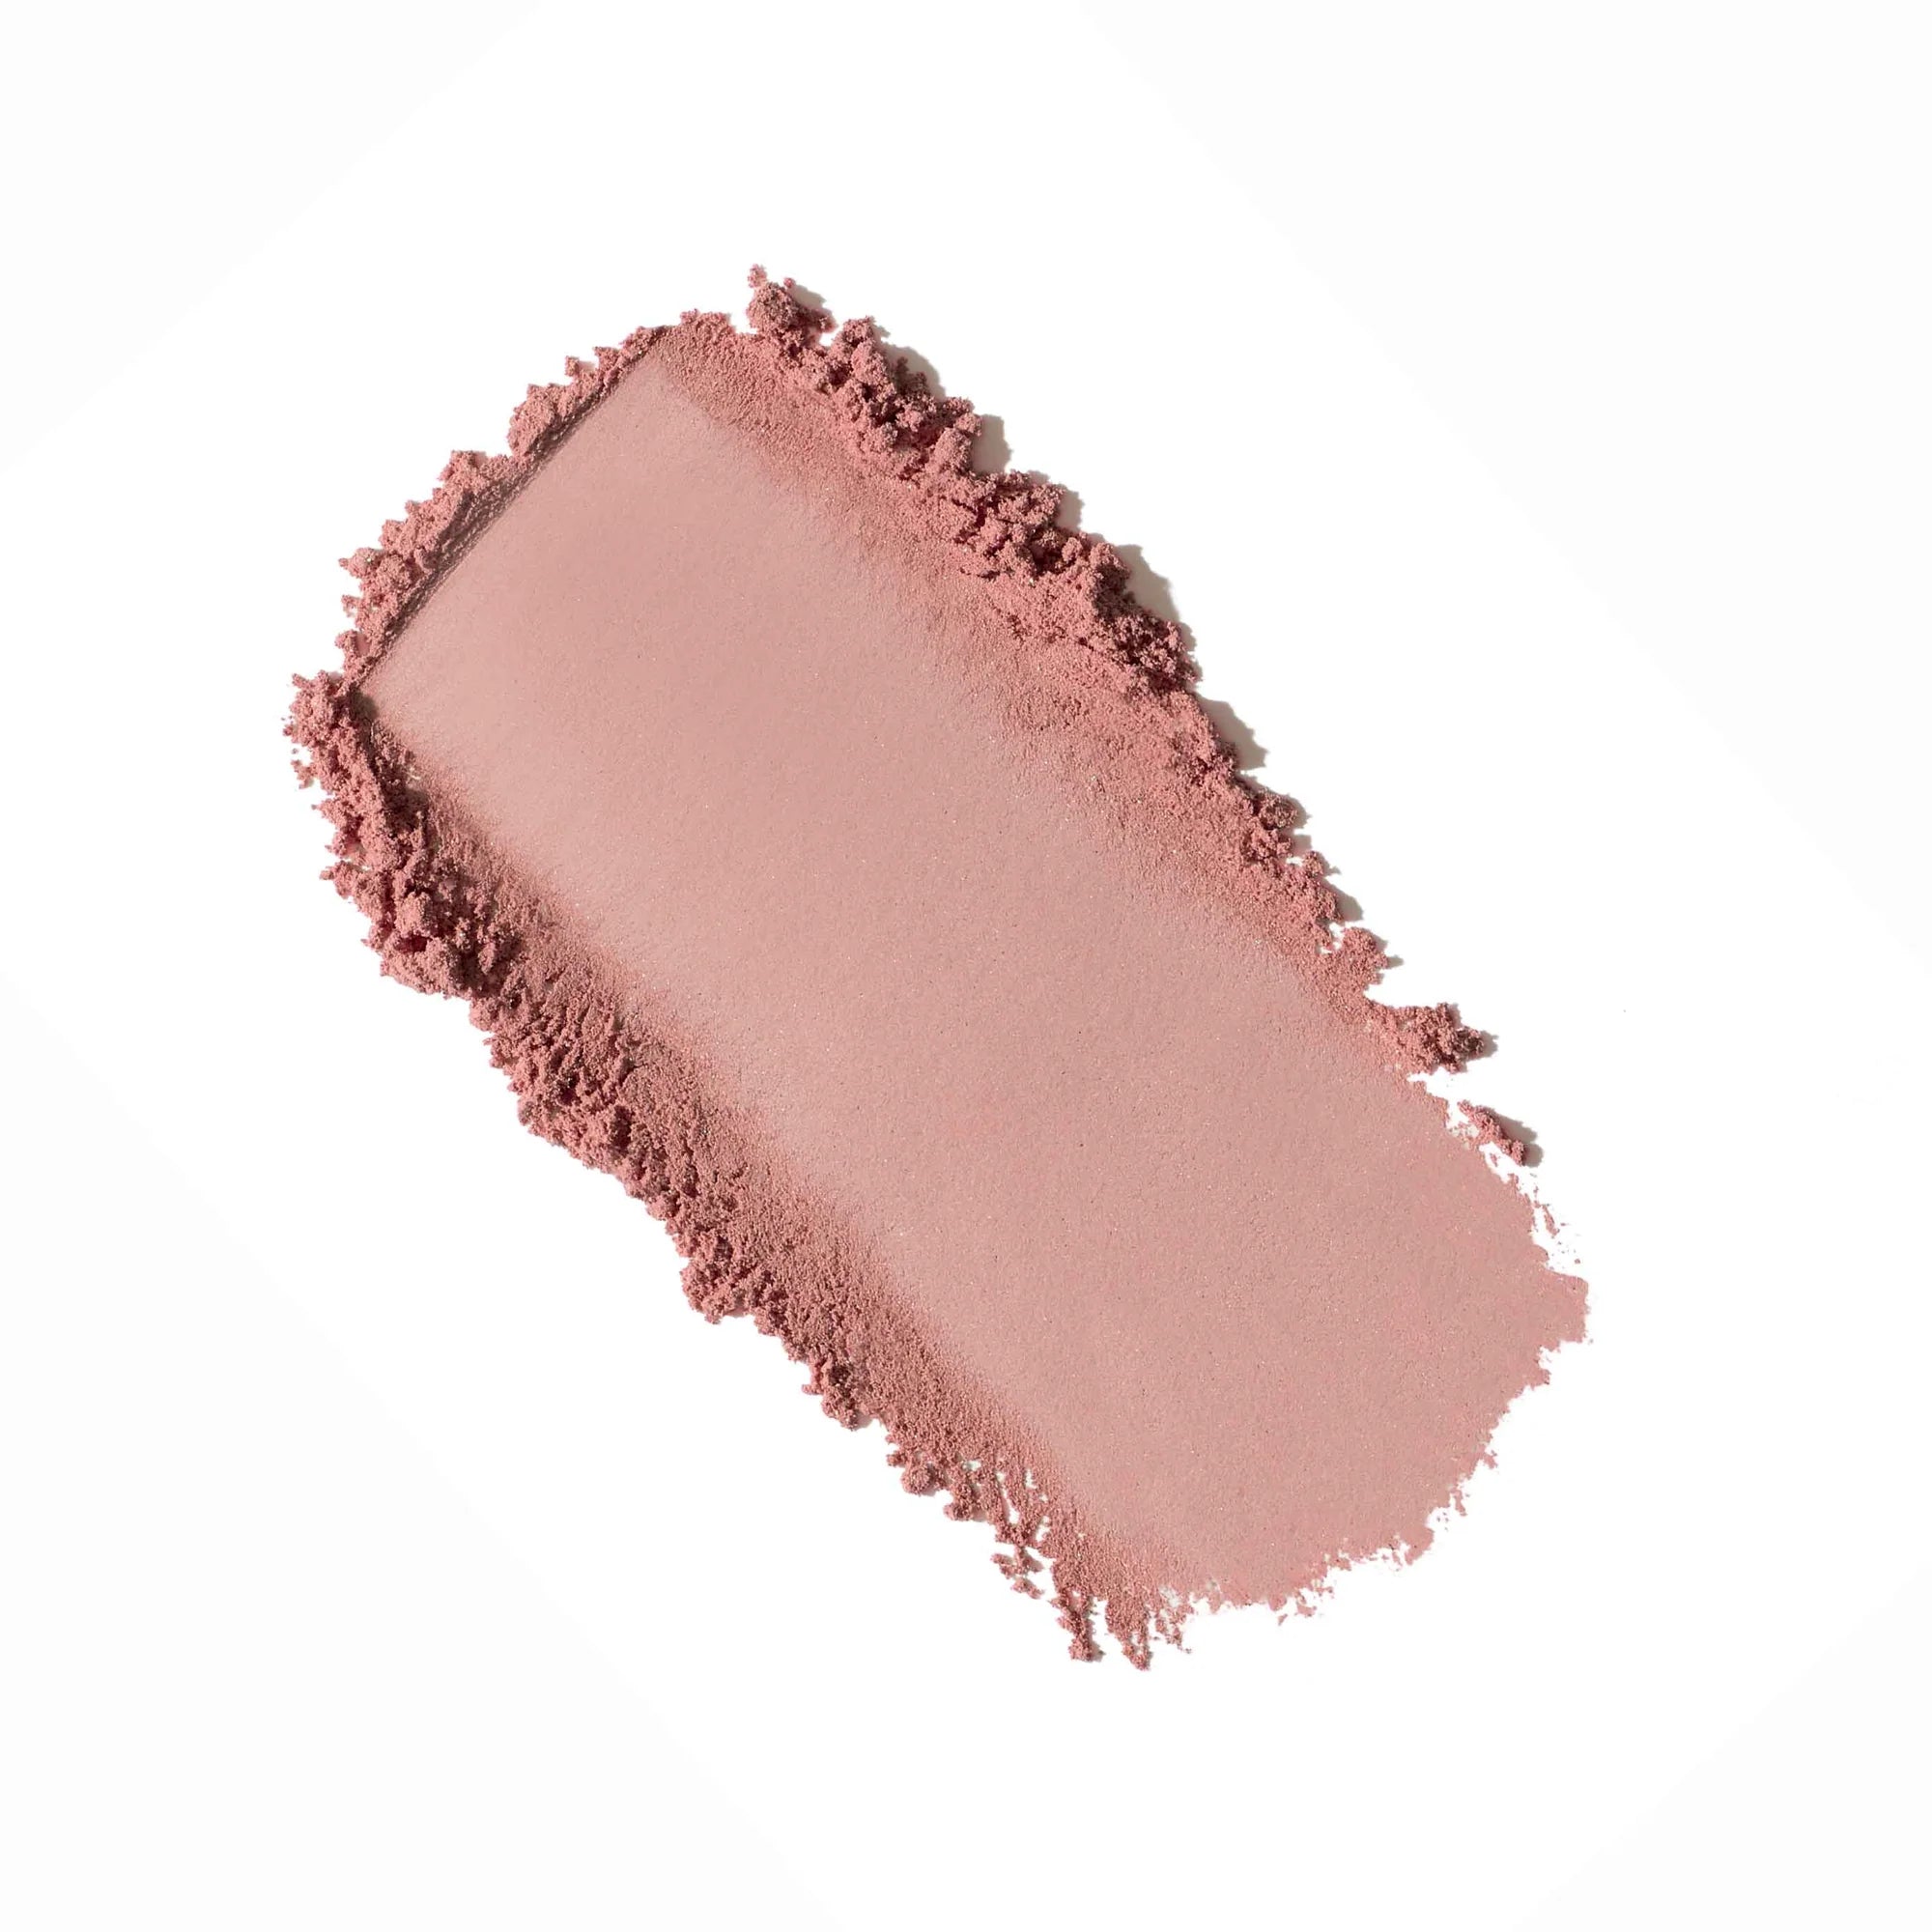 Jane Iredale's PurePressed® Blush - shade Barely Rose - soft cool pink